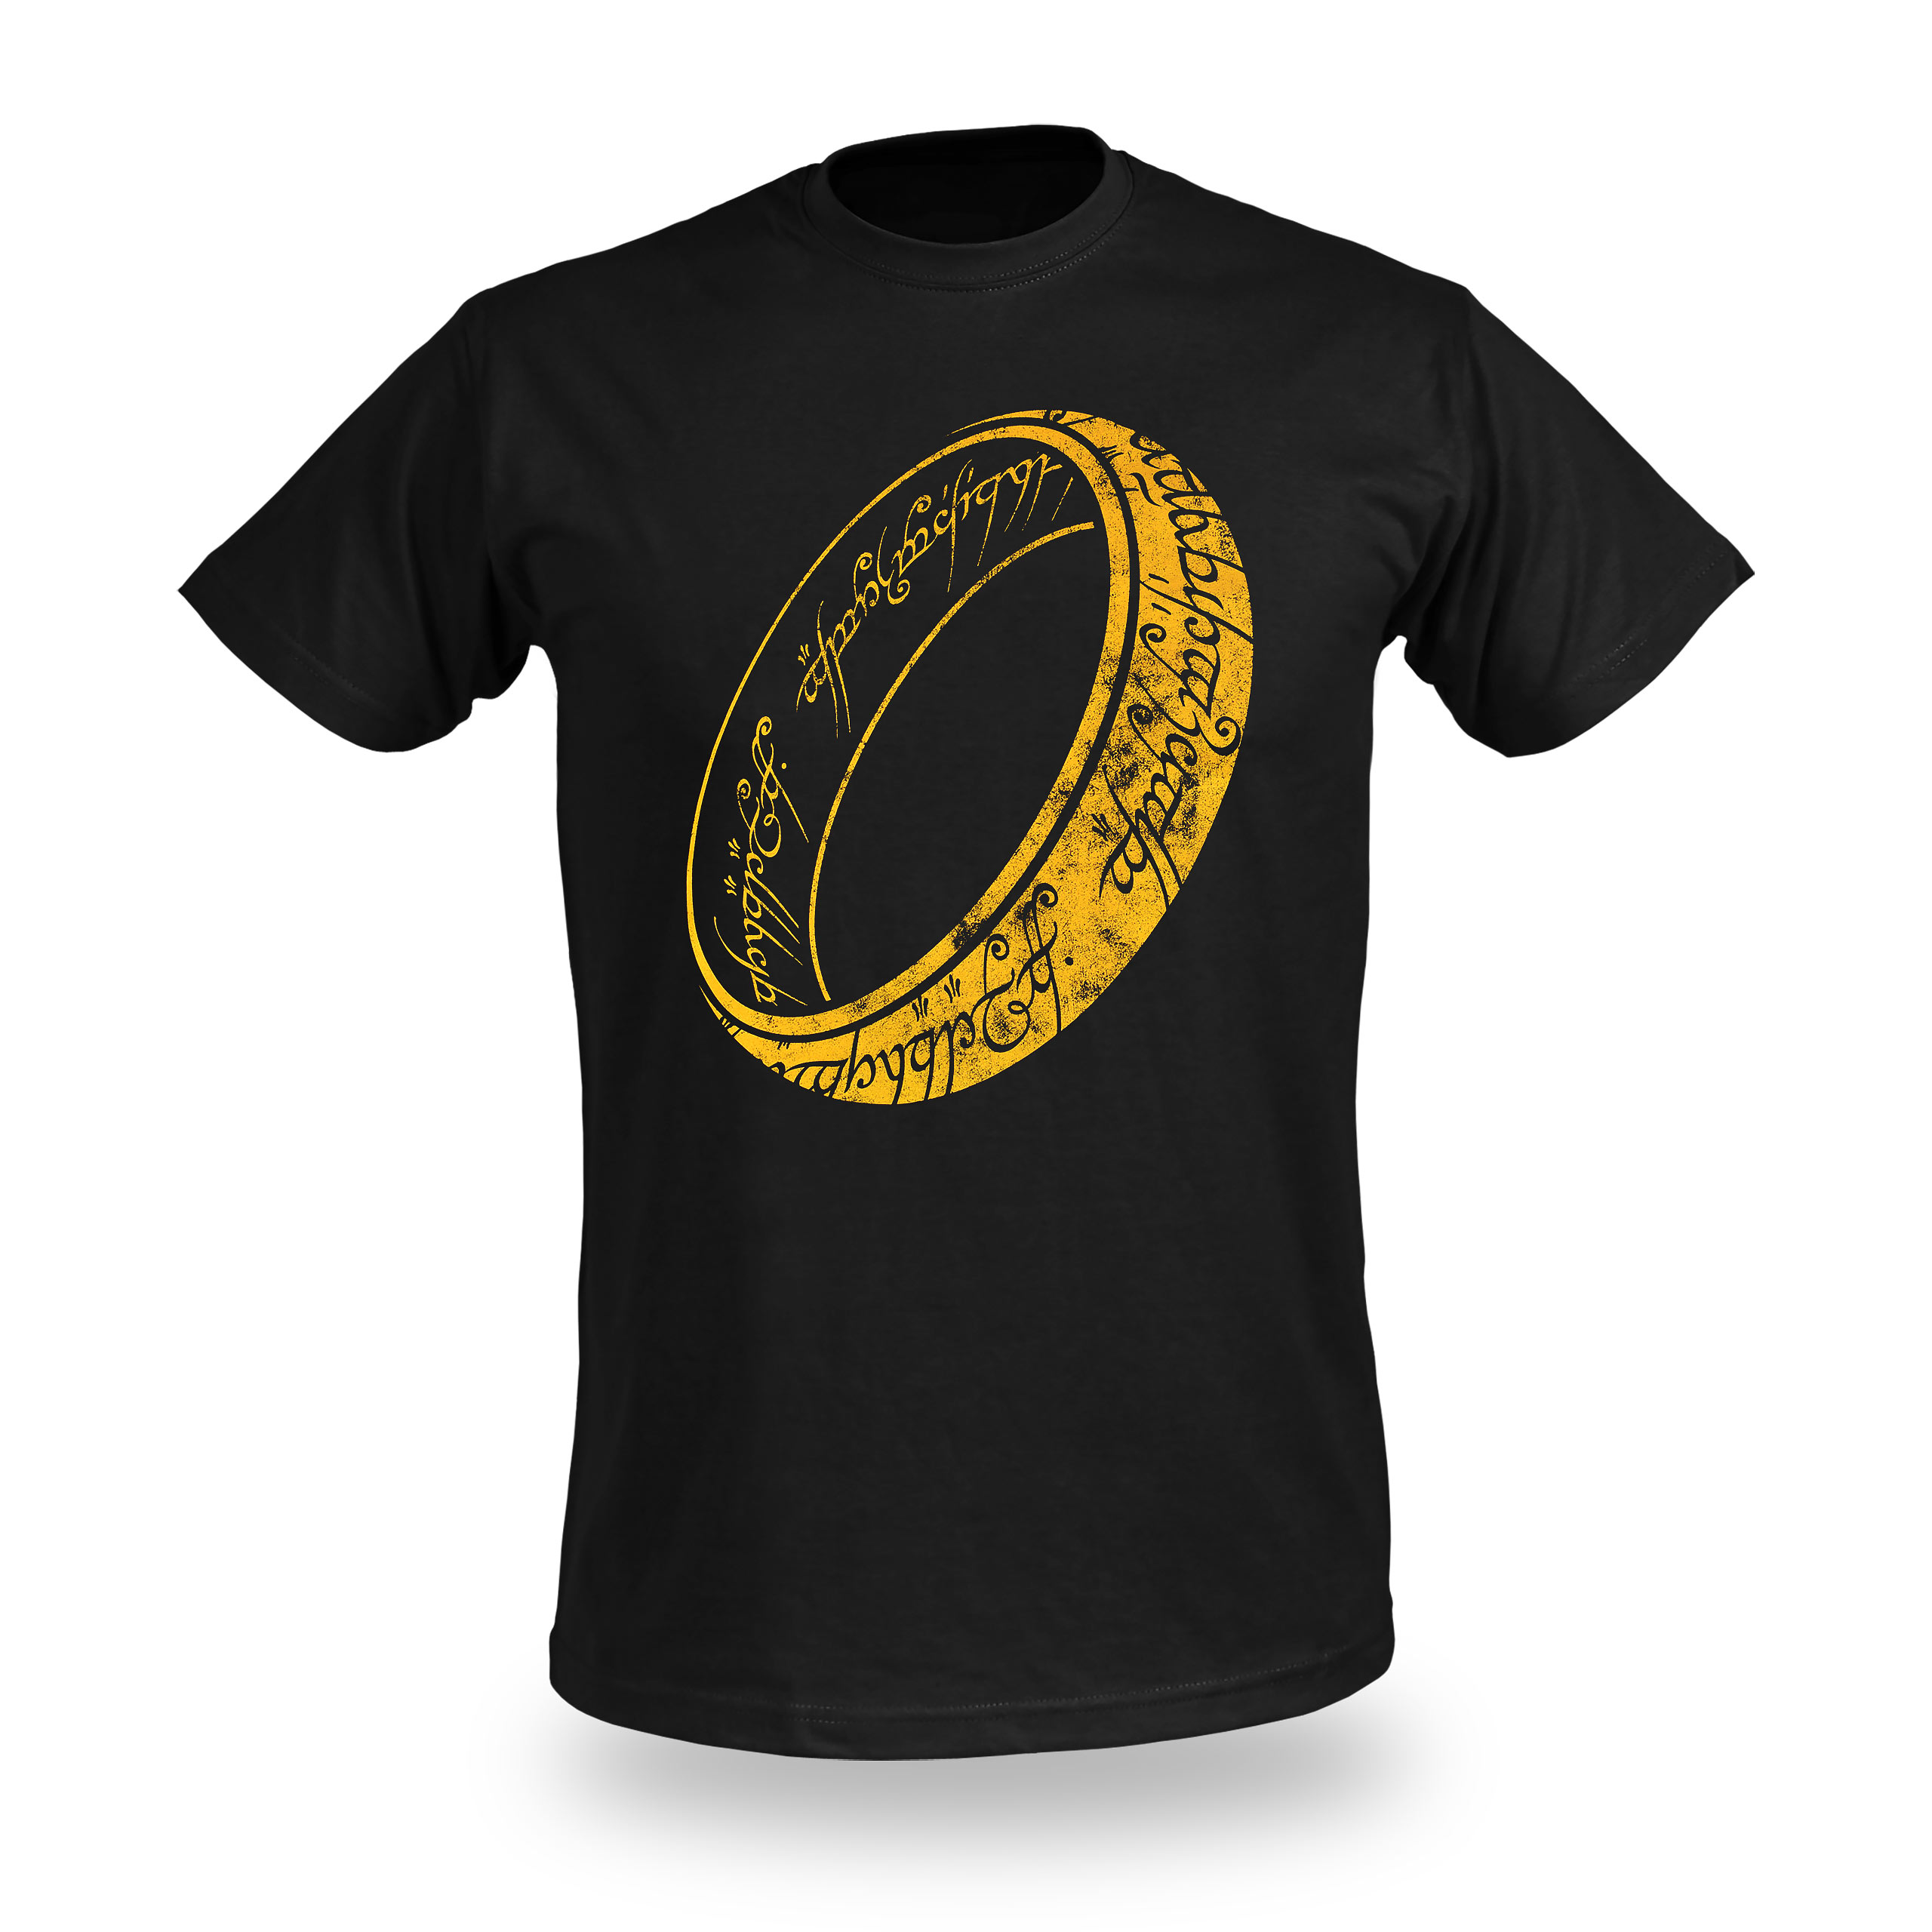 Lord of the Rings - One Ring to Rule T-Shirt Black